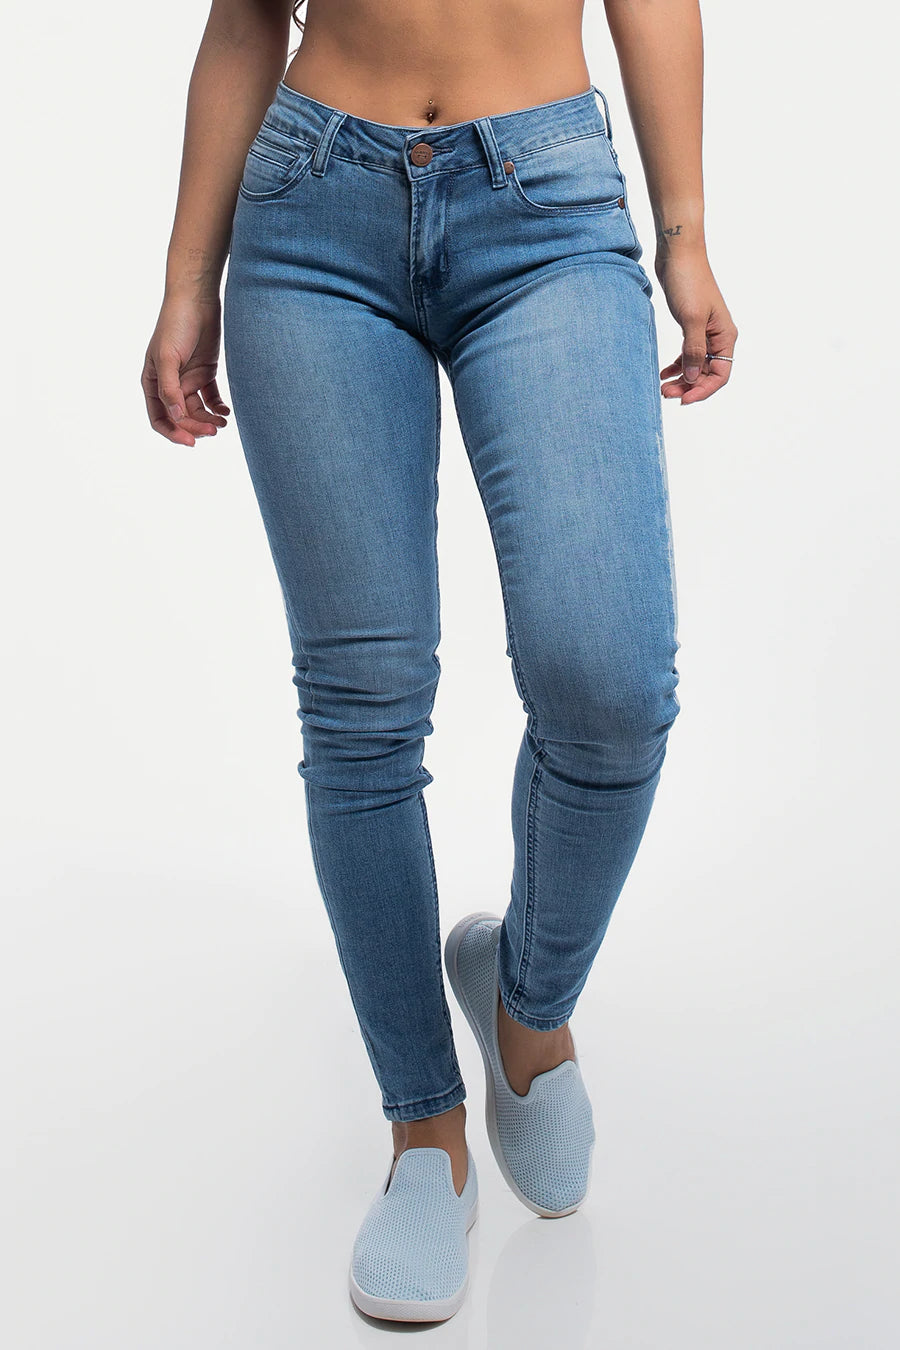 Barbell Womens Slim Athletic Fit Jeans- Light Wash - photo from front in focus #color_light-wash